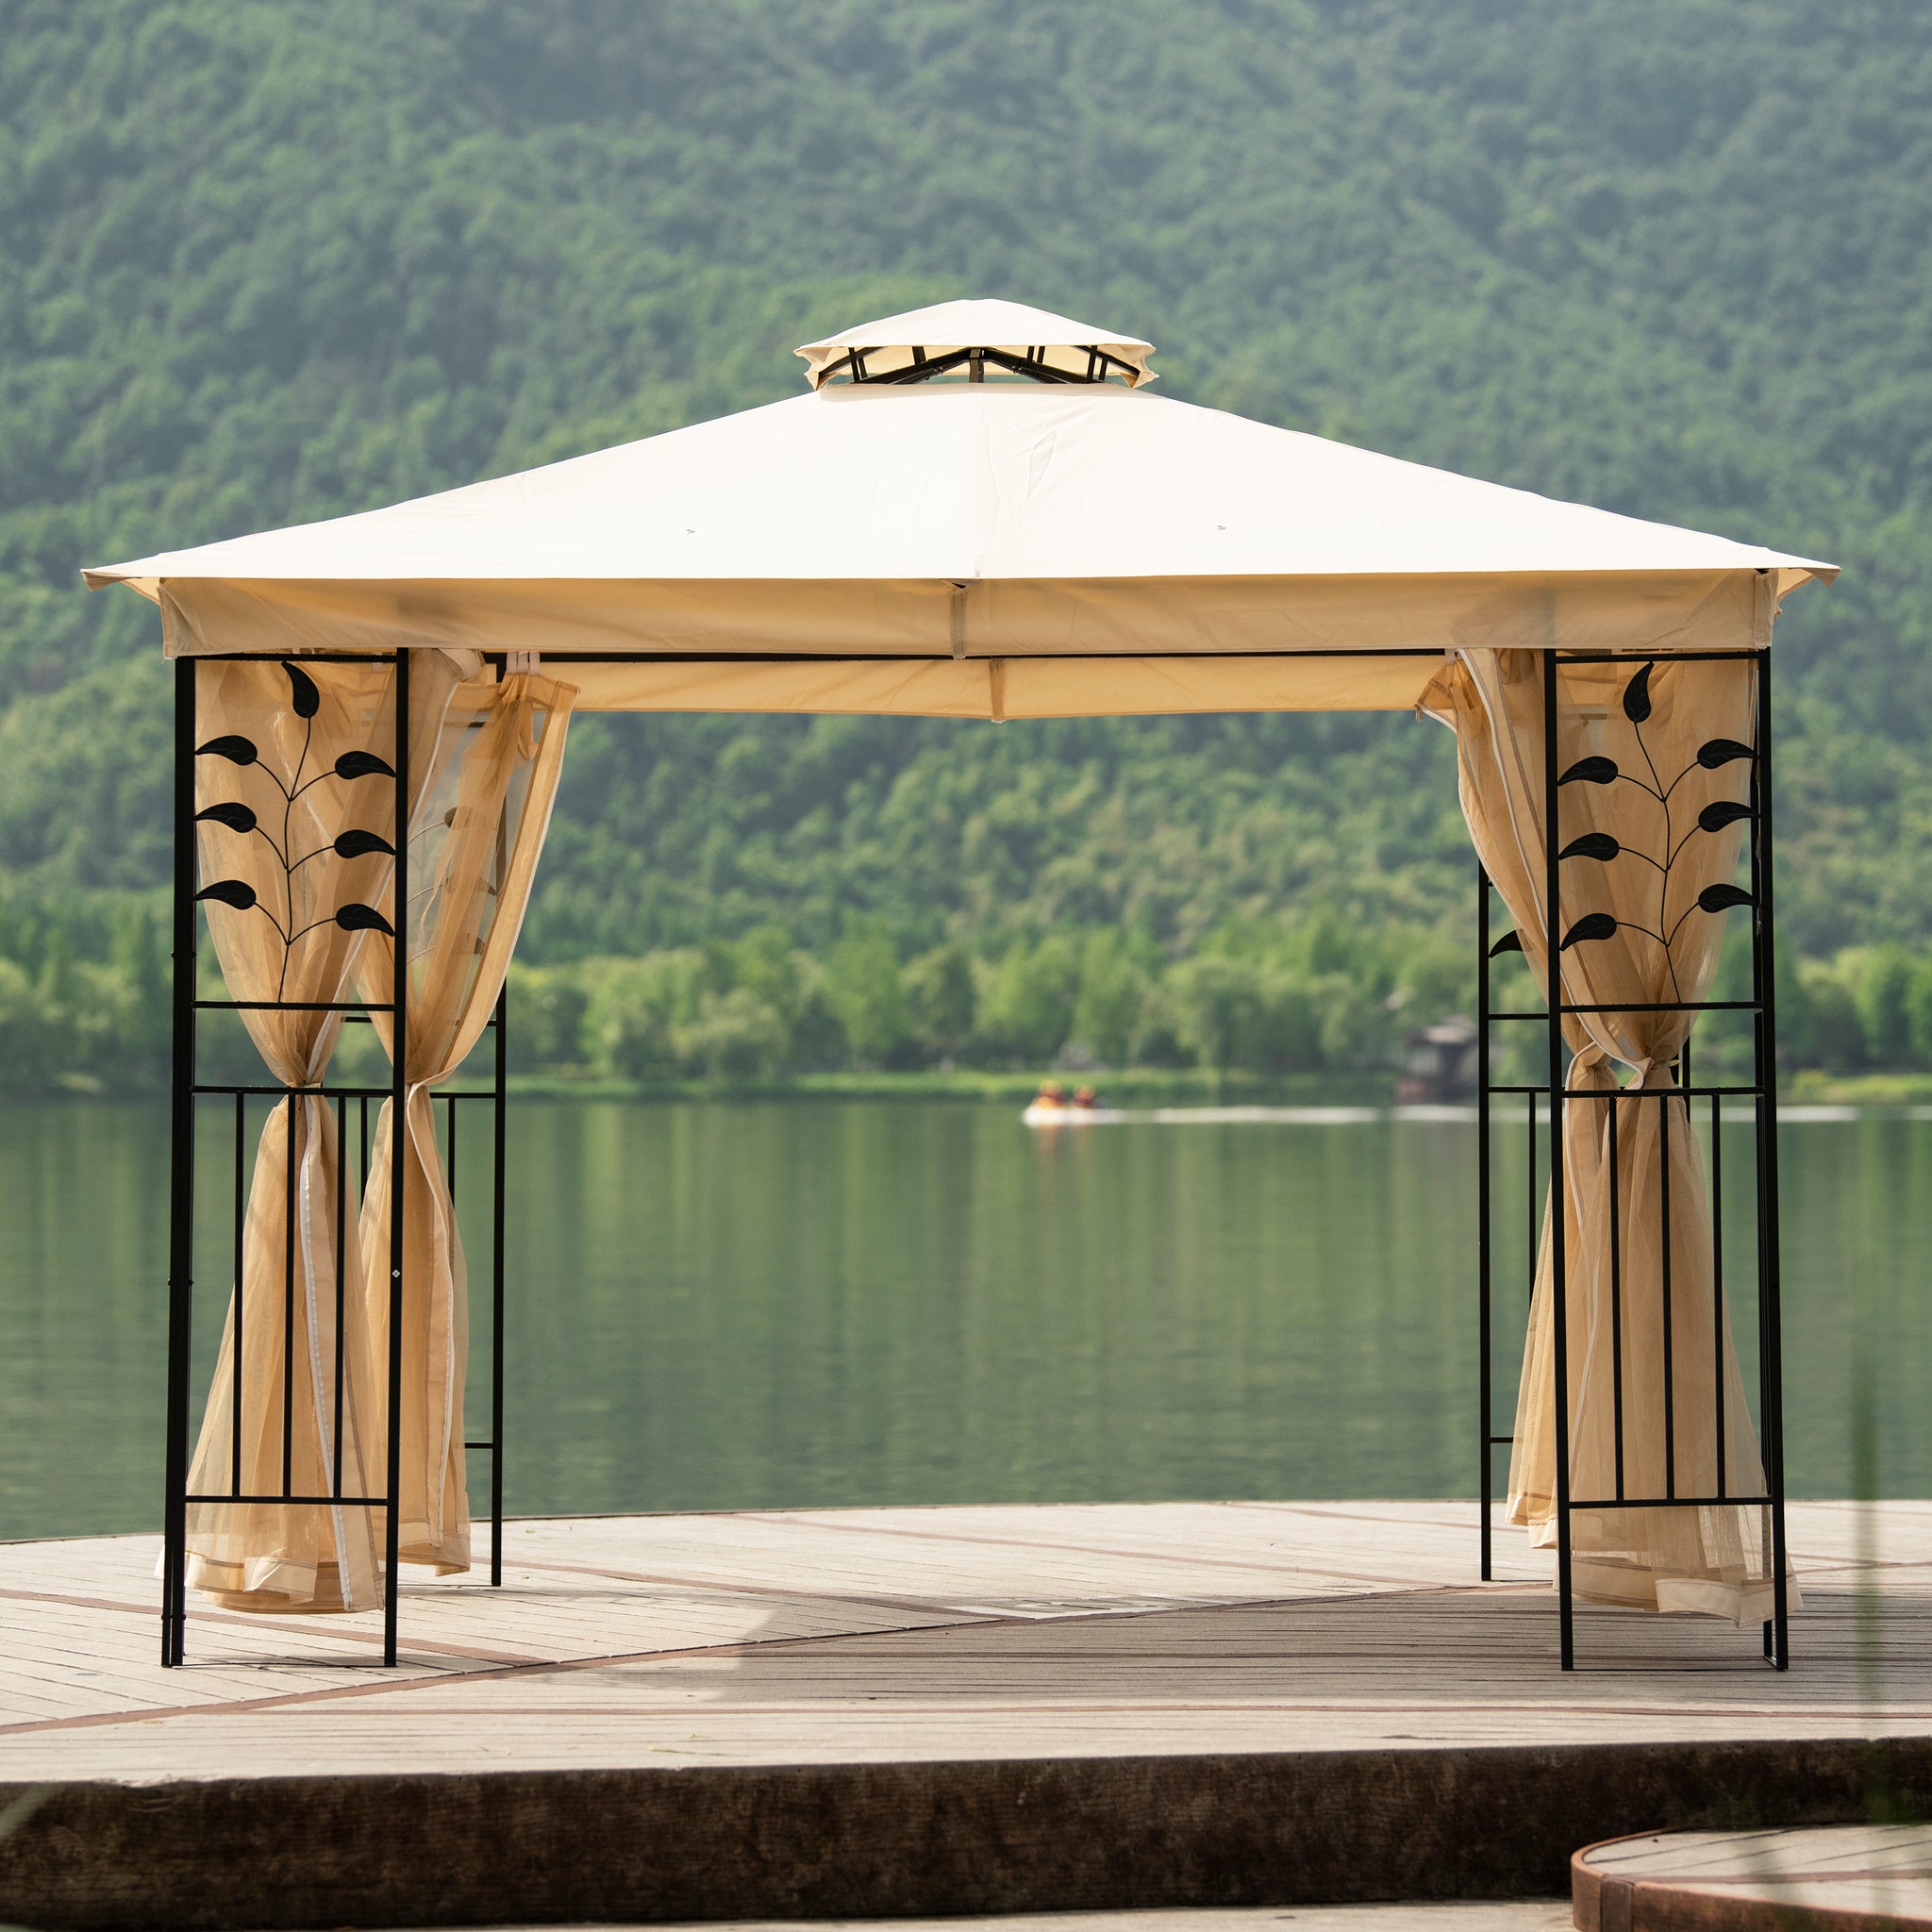 10Ft. Wx8Ft. H Outdoor Steel Vented Dome Top Patio Gazebo with Netting for Backyard, Poolside and Deck, Beige